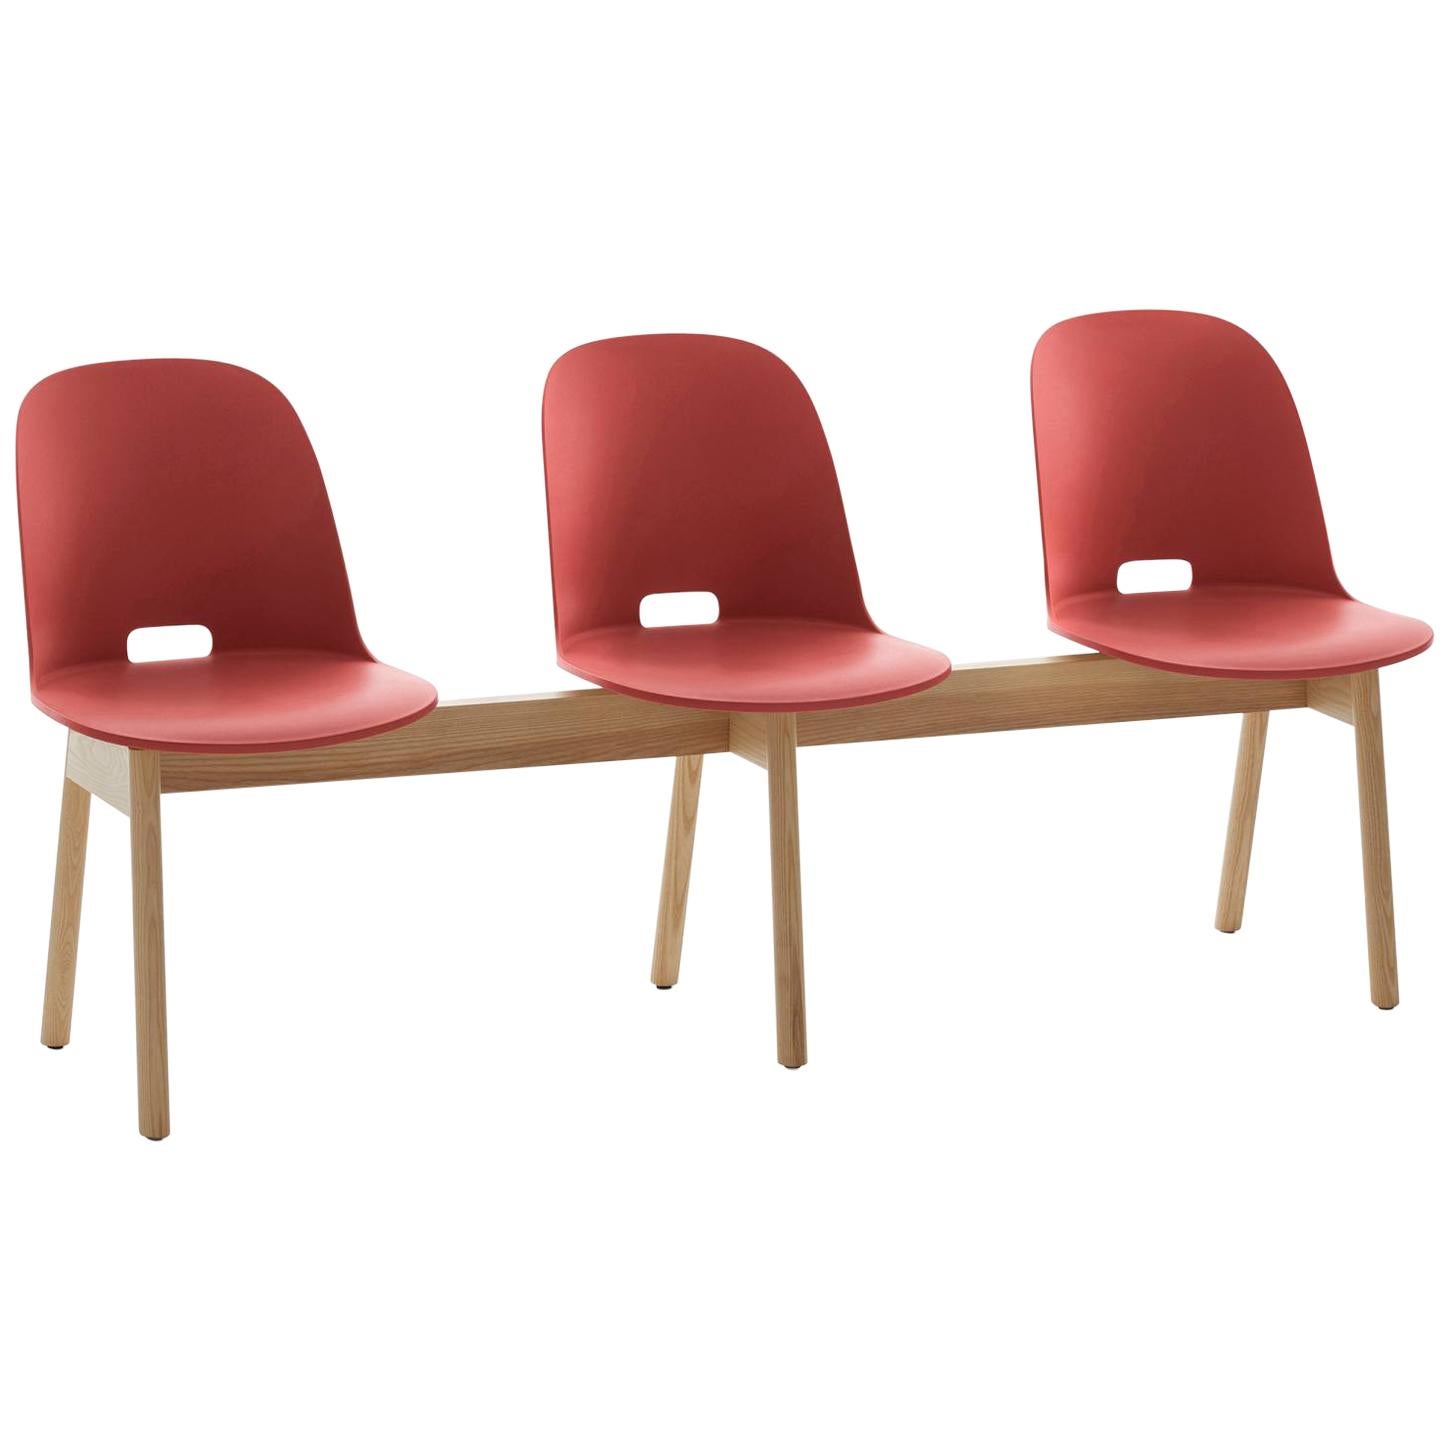 Emeco Alfi 3-Seat Bench in Red and Ash with High Back by Jasper Morrison